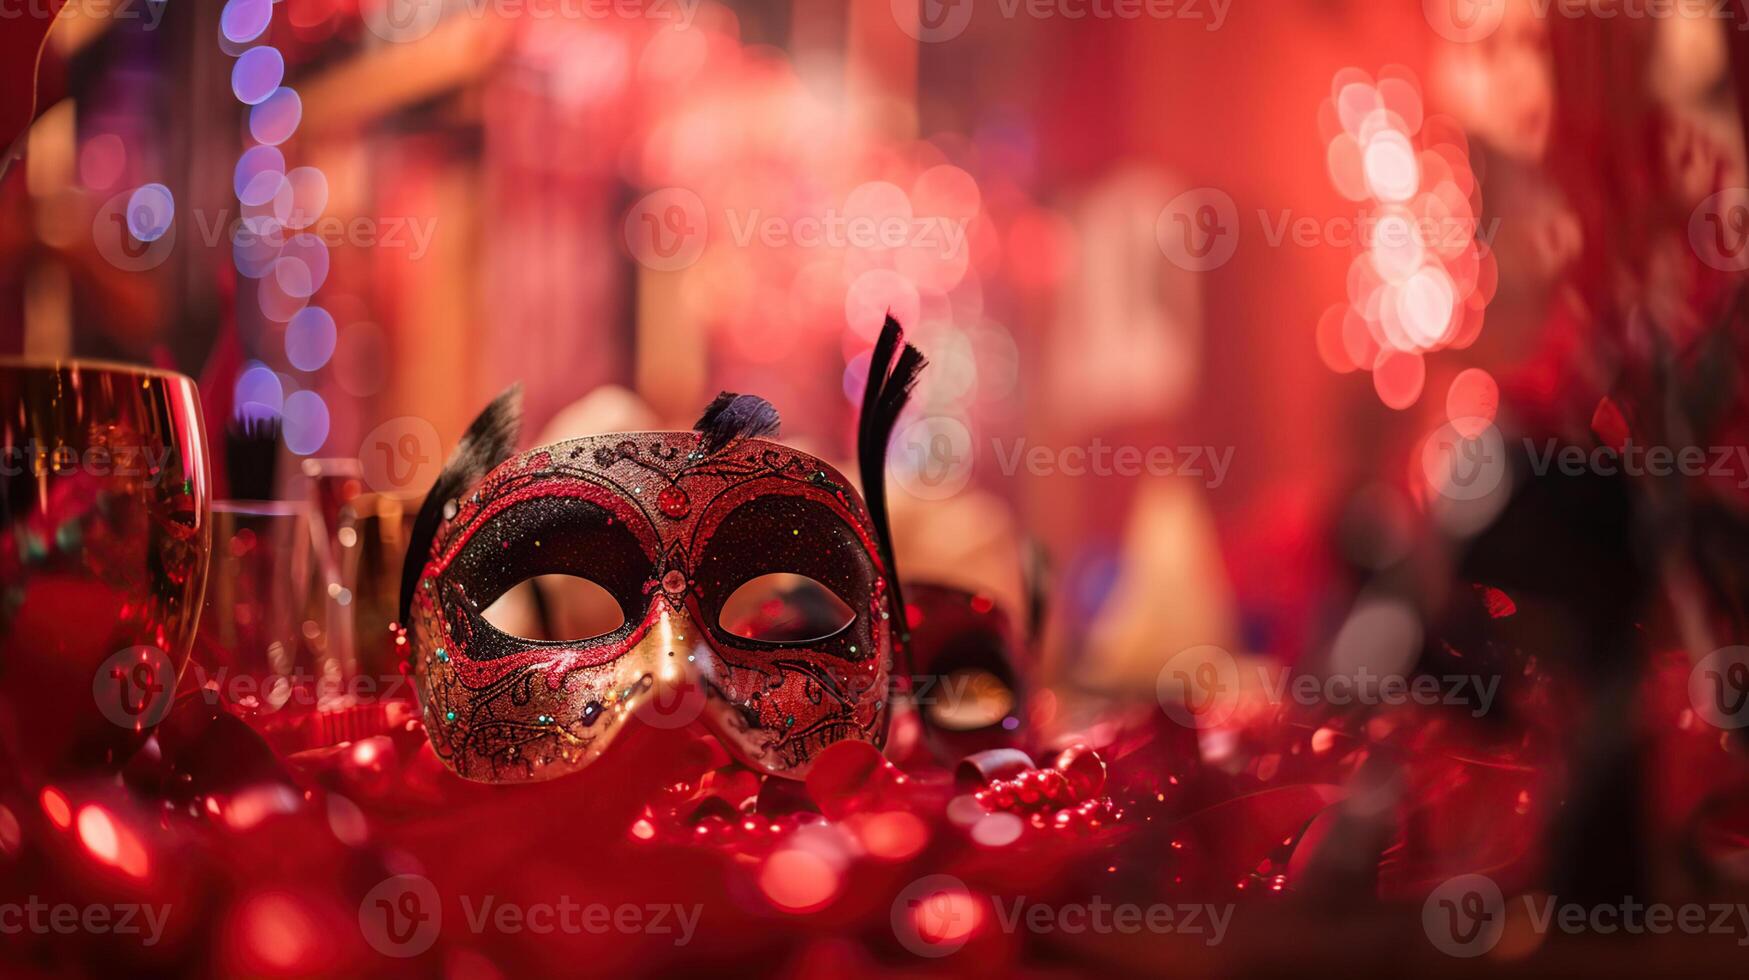 Venetian Masks On Red Glitter With Shiny Streamers On Abstract Defocused Bokeh Lights - Carnival Party. photo